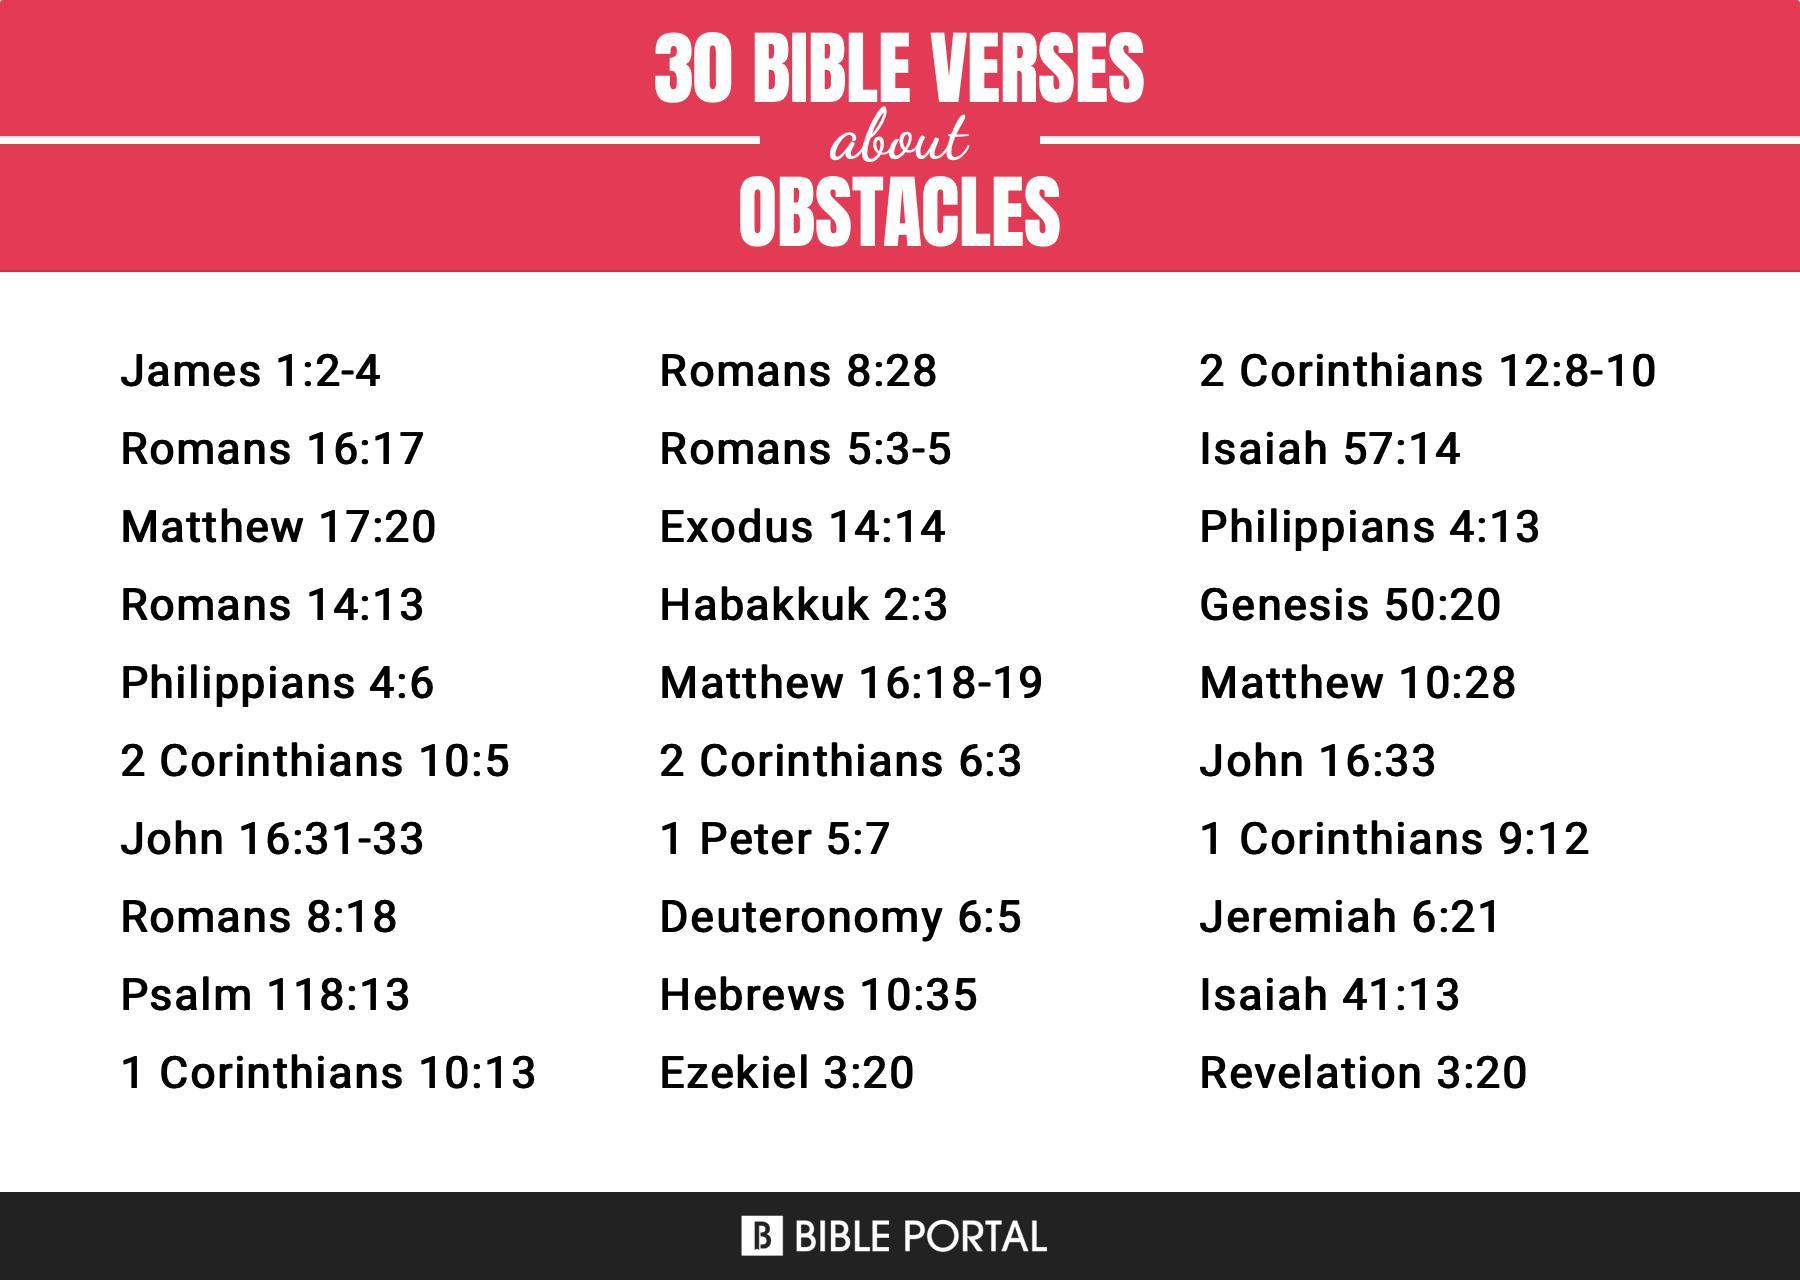 What Does the Bible Say about Obstacles?